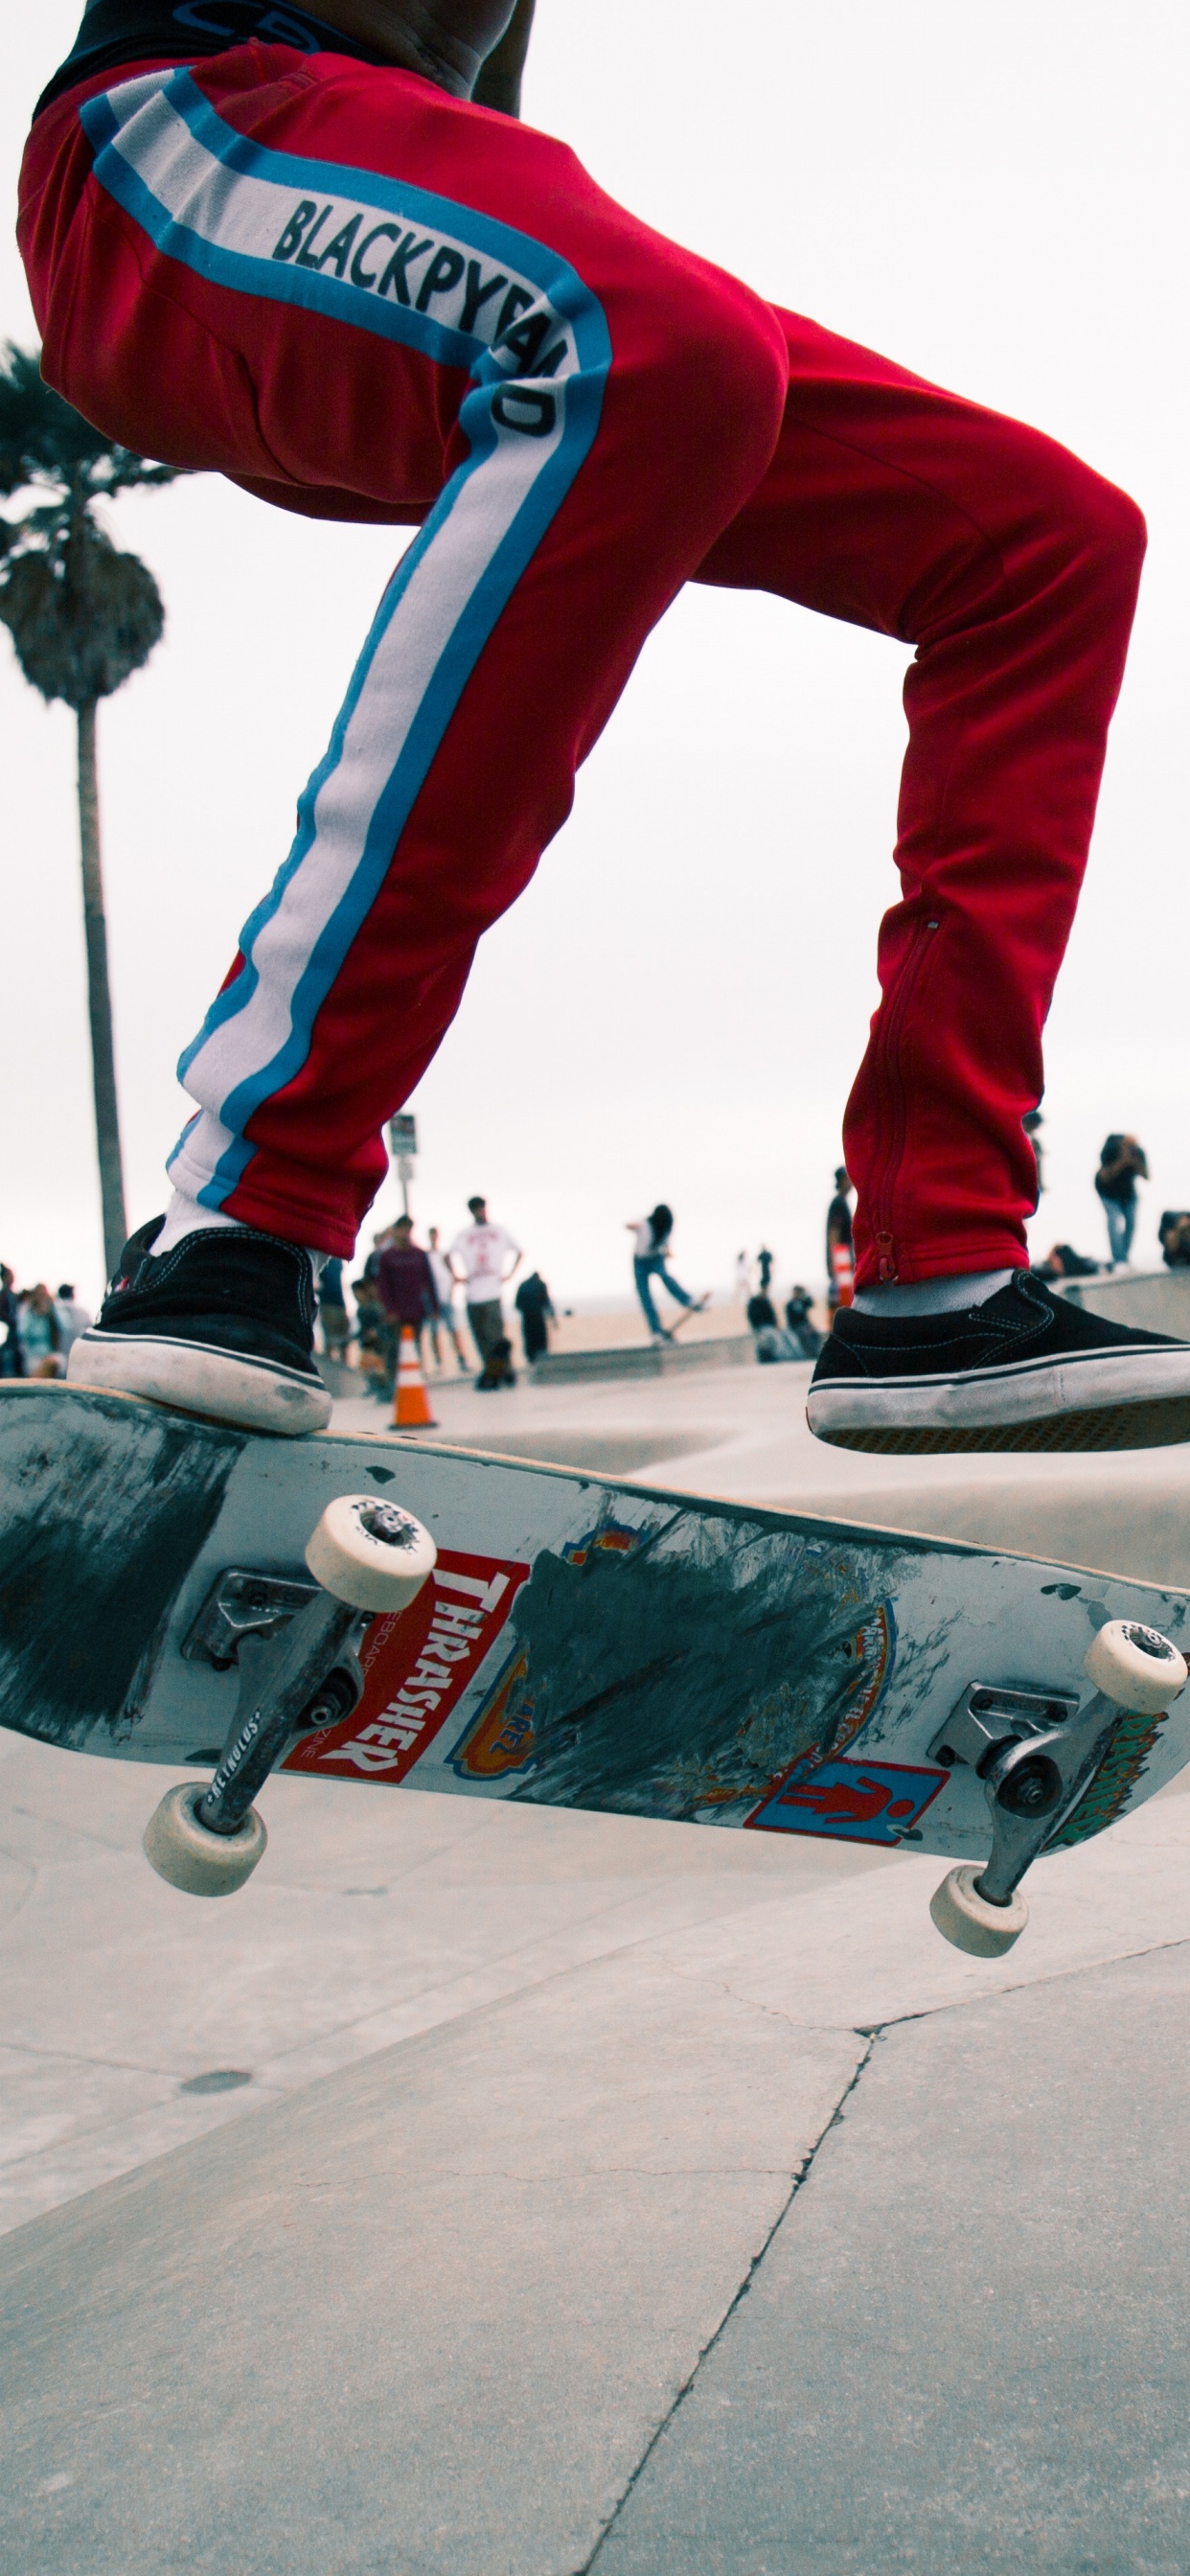 Man in Red Pants and Black and White Sneakers Riding Skateboard. Wallpaper in 1242x2688 Resolution